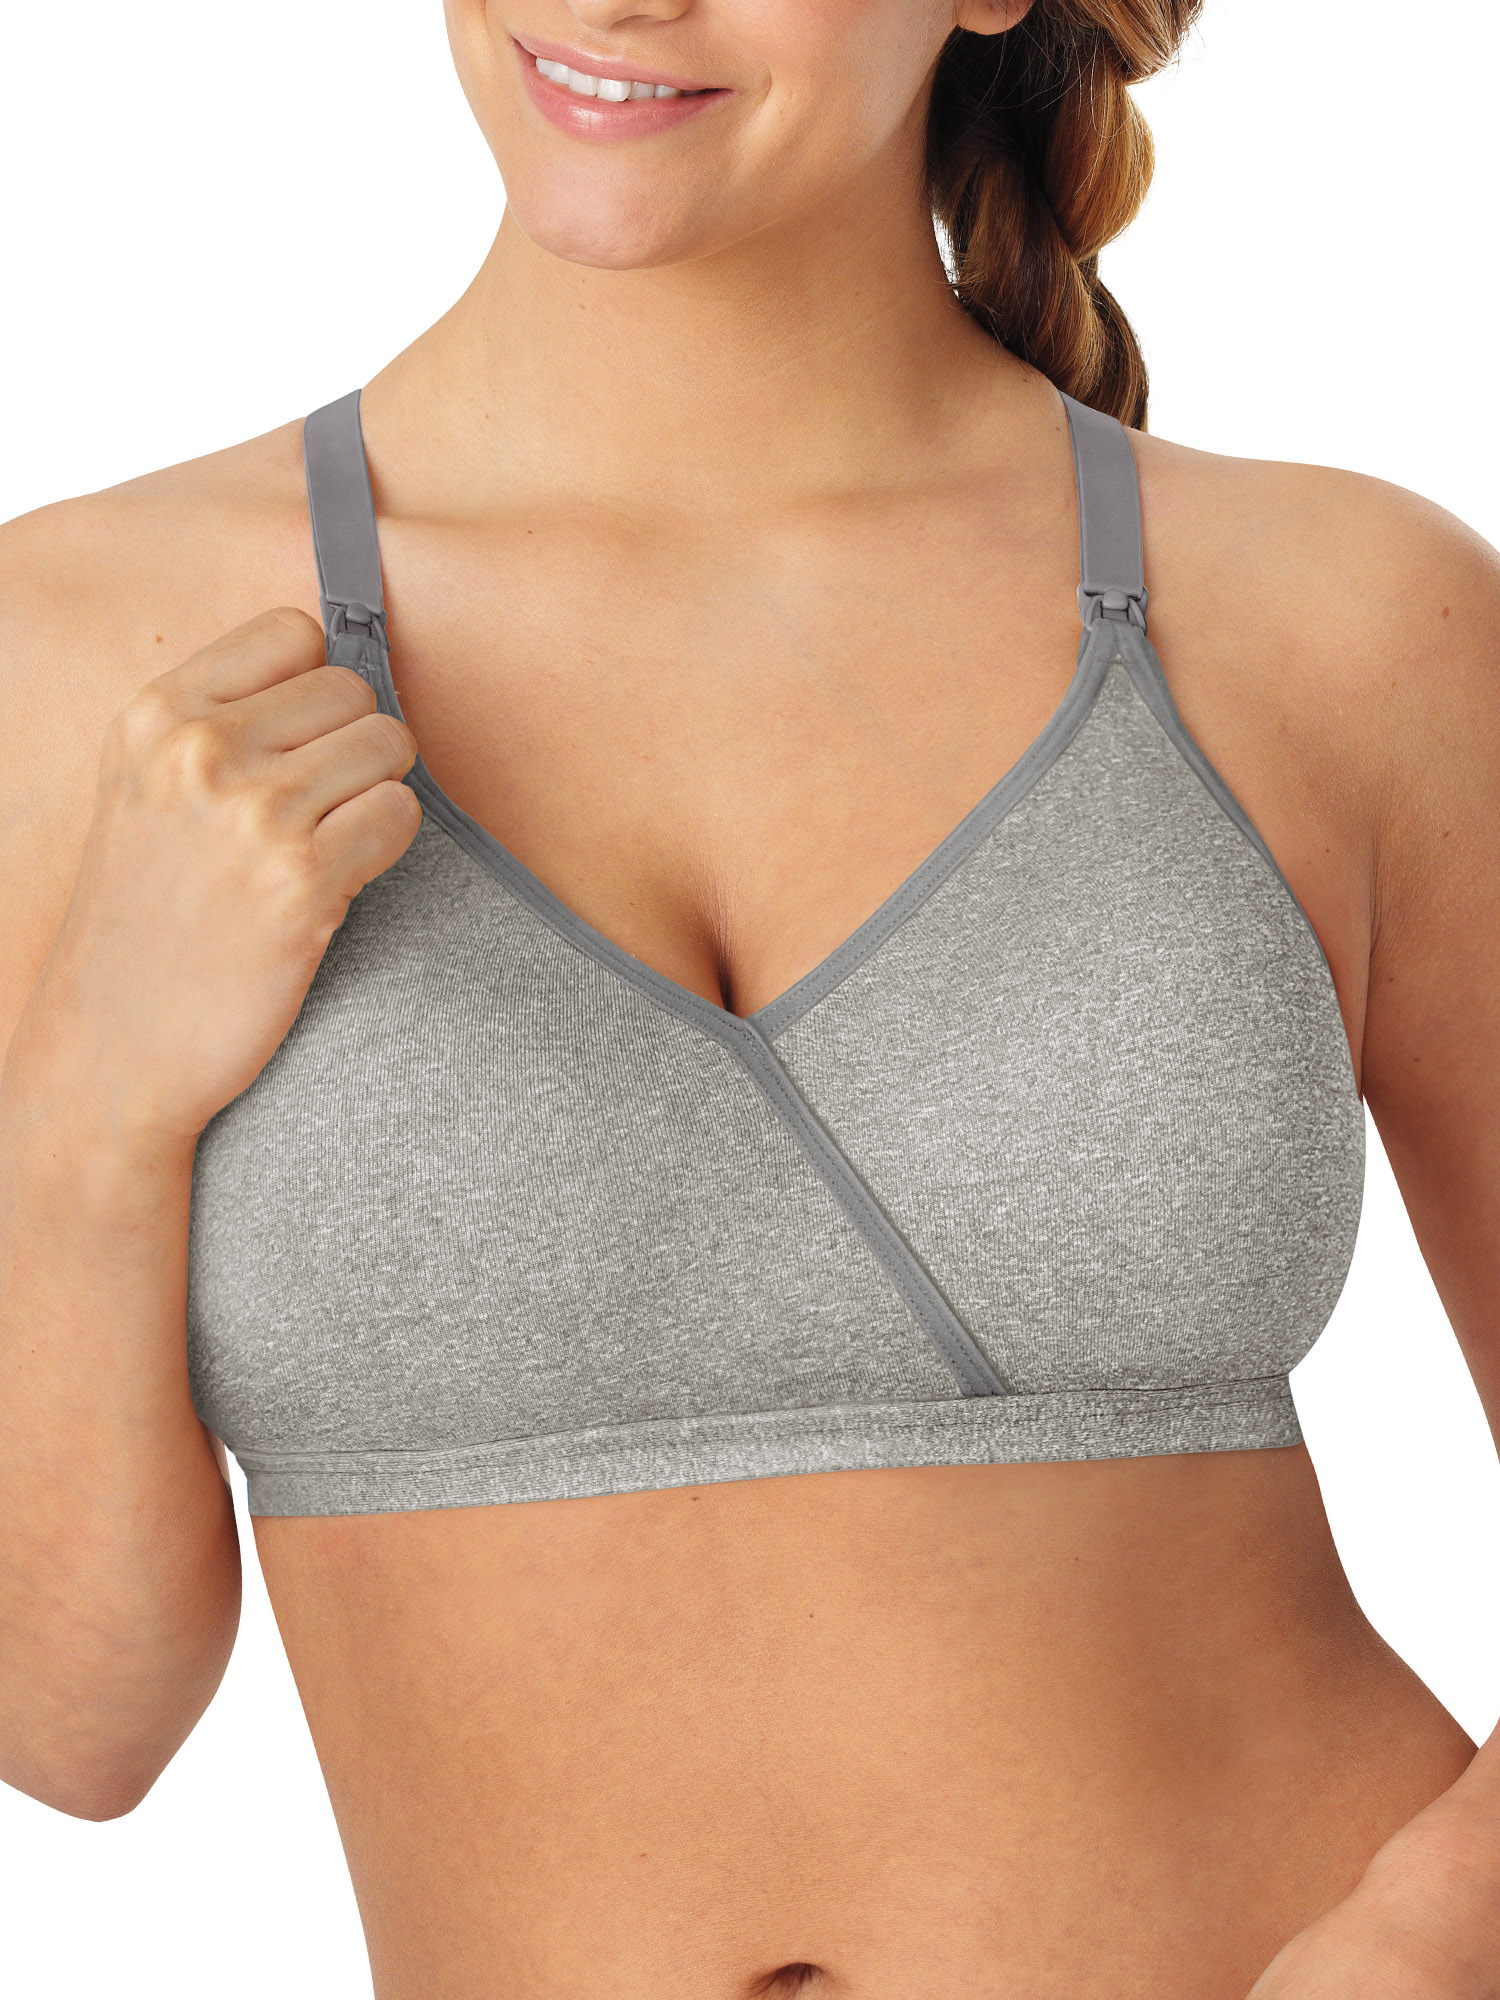 Playtex Womens Secrets Seamless Wirefree Nursing Bra with X-Temp Cooling, 2XL - image 1 of 3